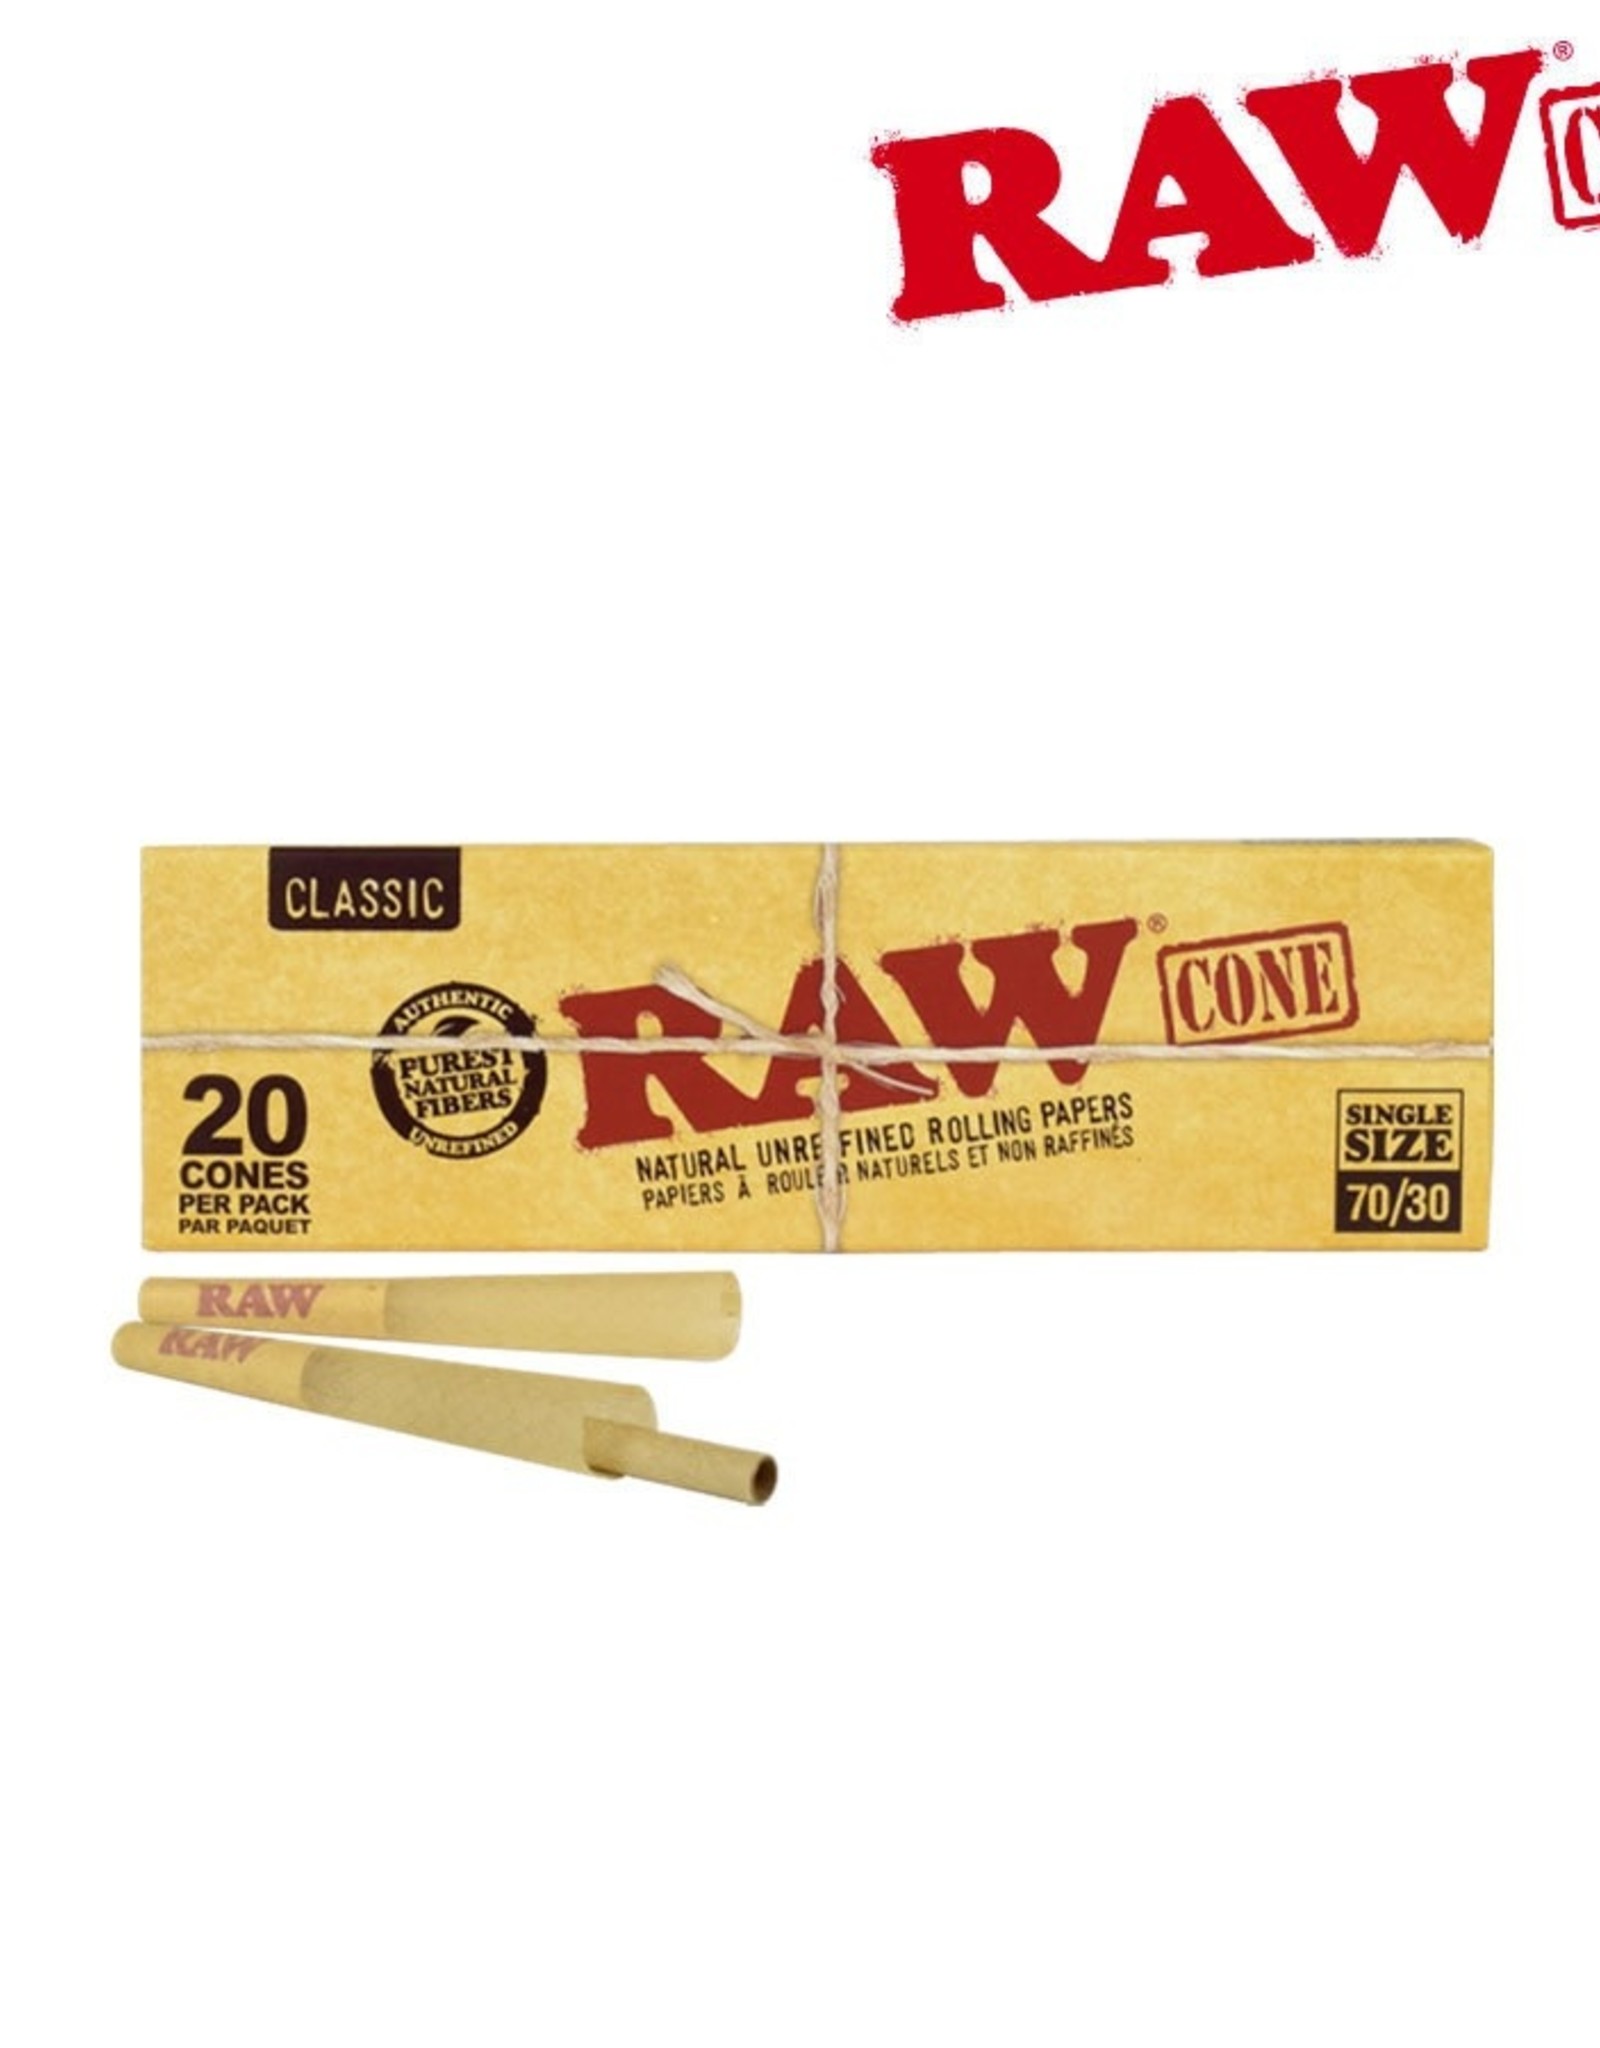 RAW RAW Pre-Rolled Cones 70/30mm